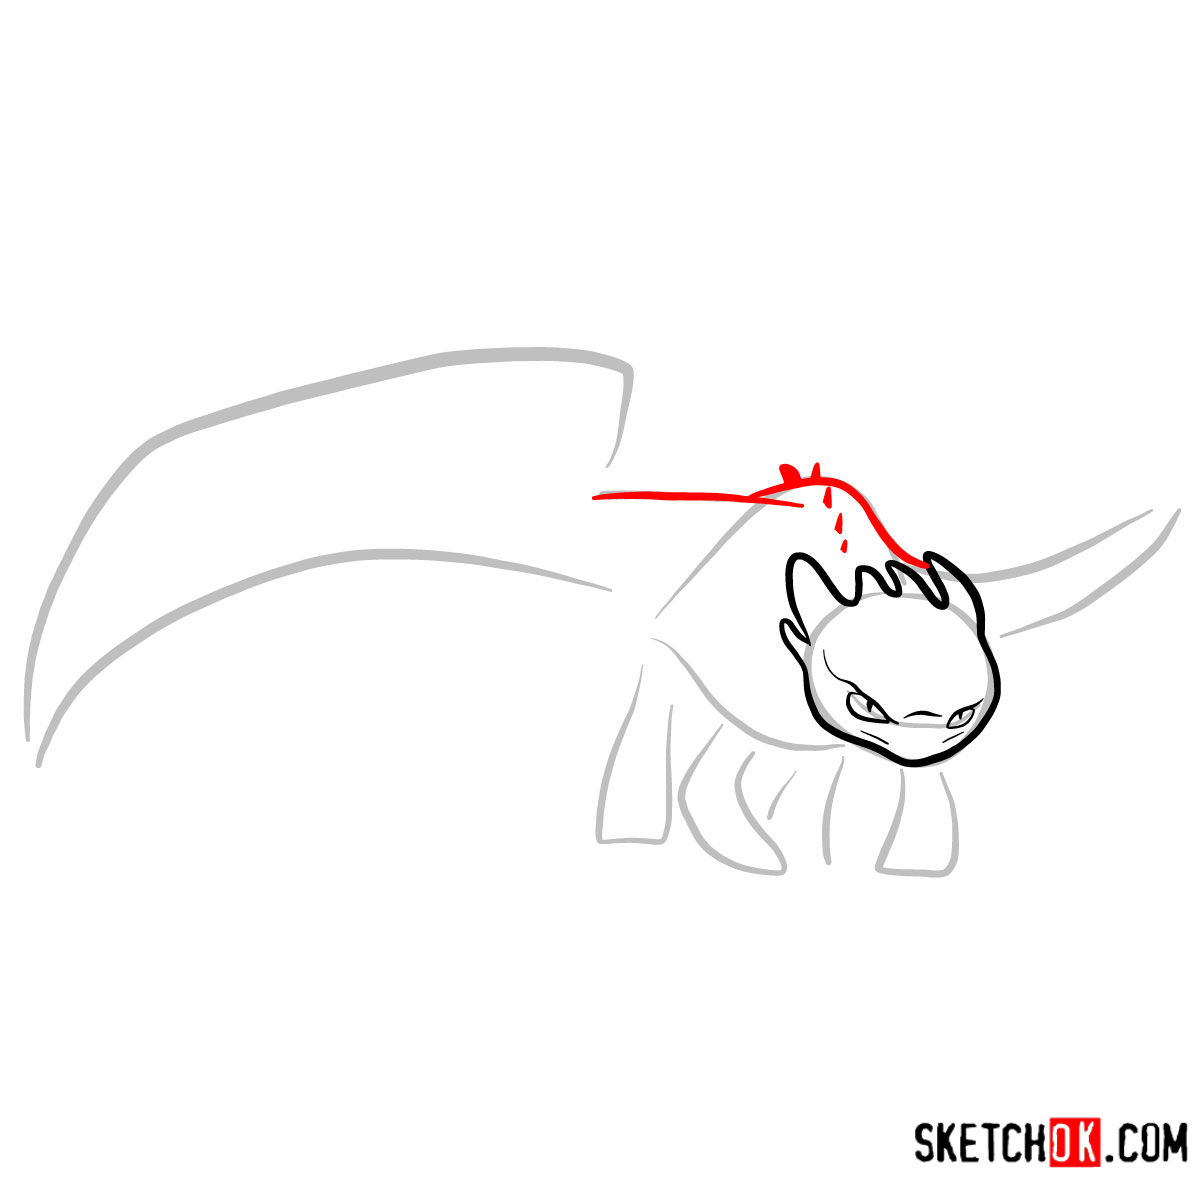 How to draw The Night Fury Dragon | How to Train Your Dragon - Sketchok easy  drawing guides